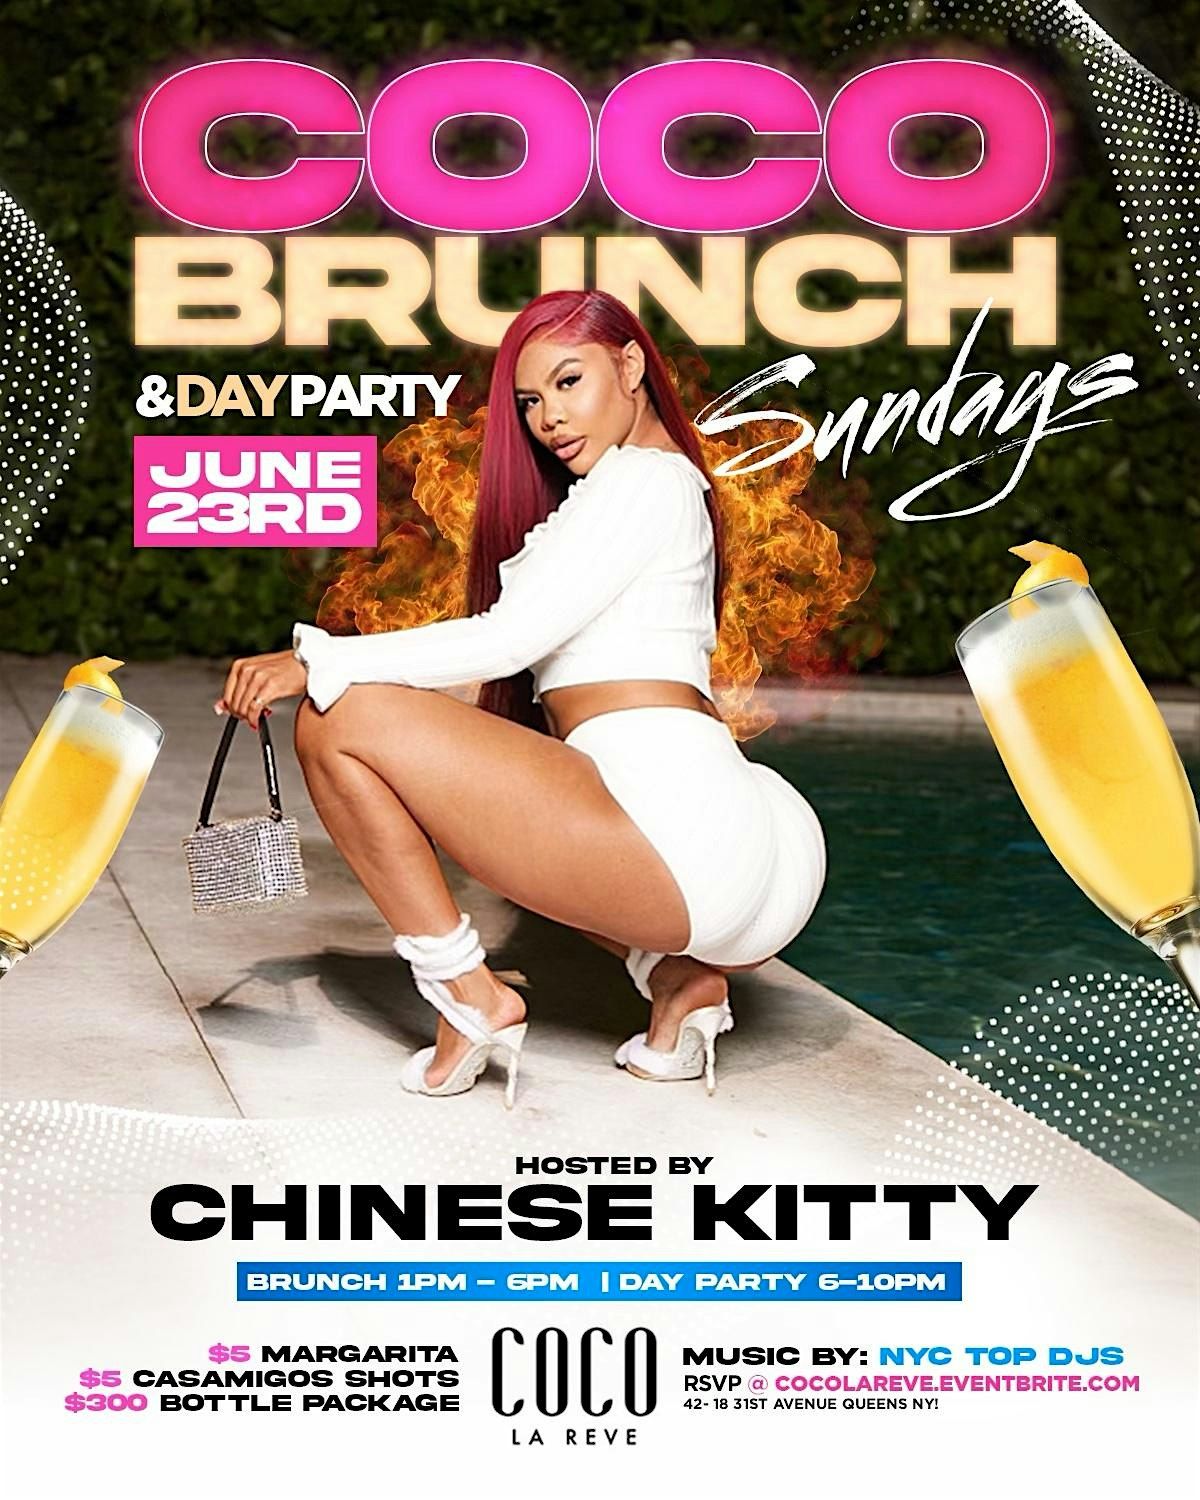 COCO BRUNCH & DAY PARTY HOSTED BY @CHINESEKITTY